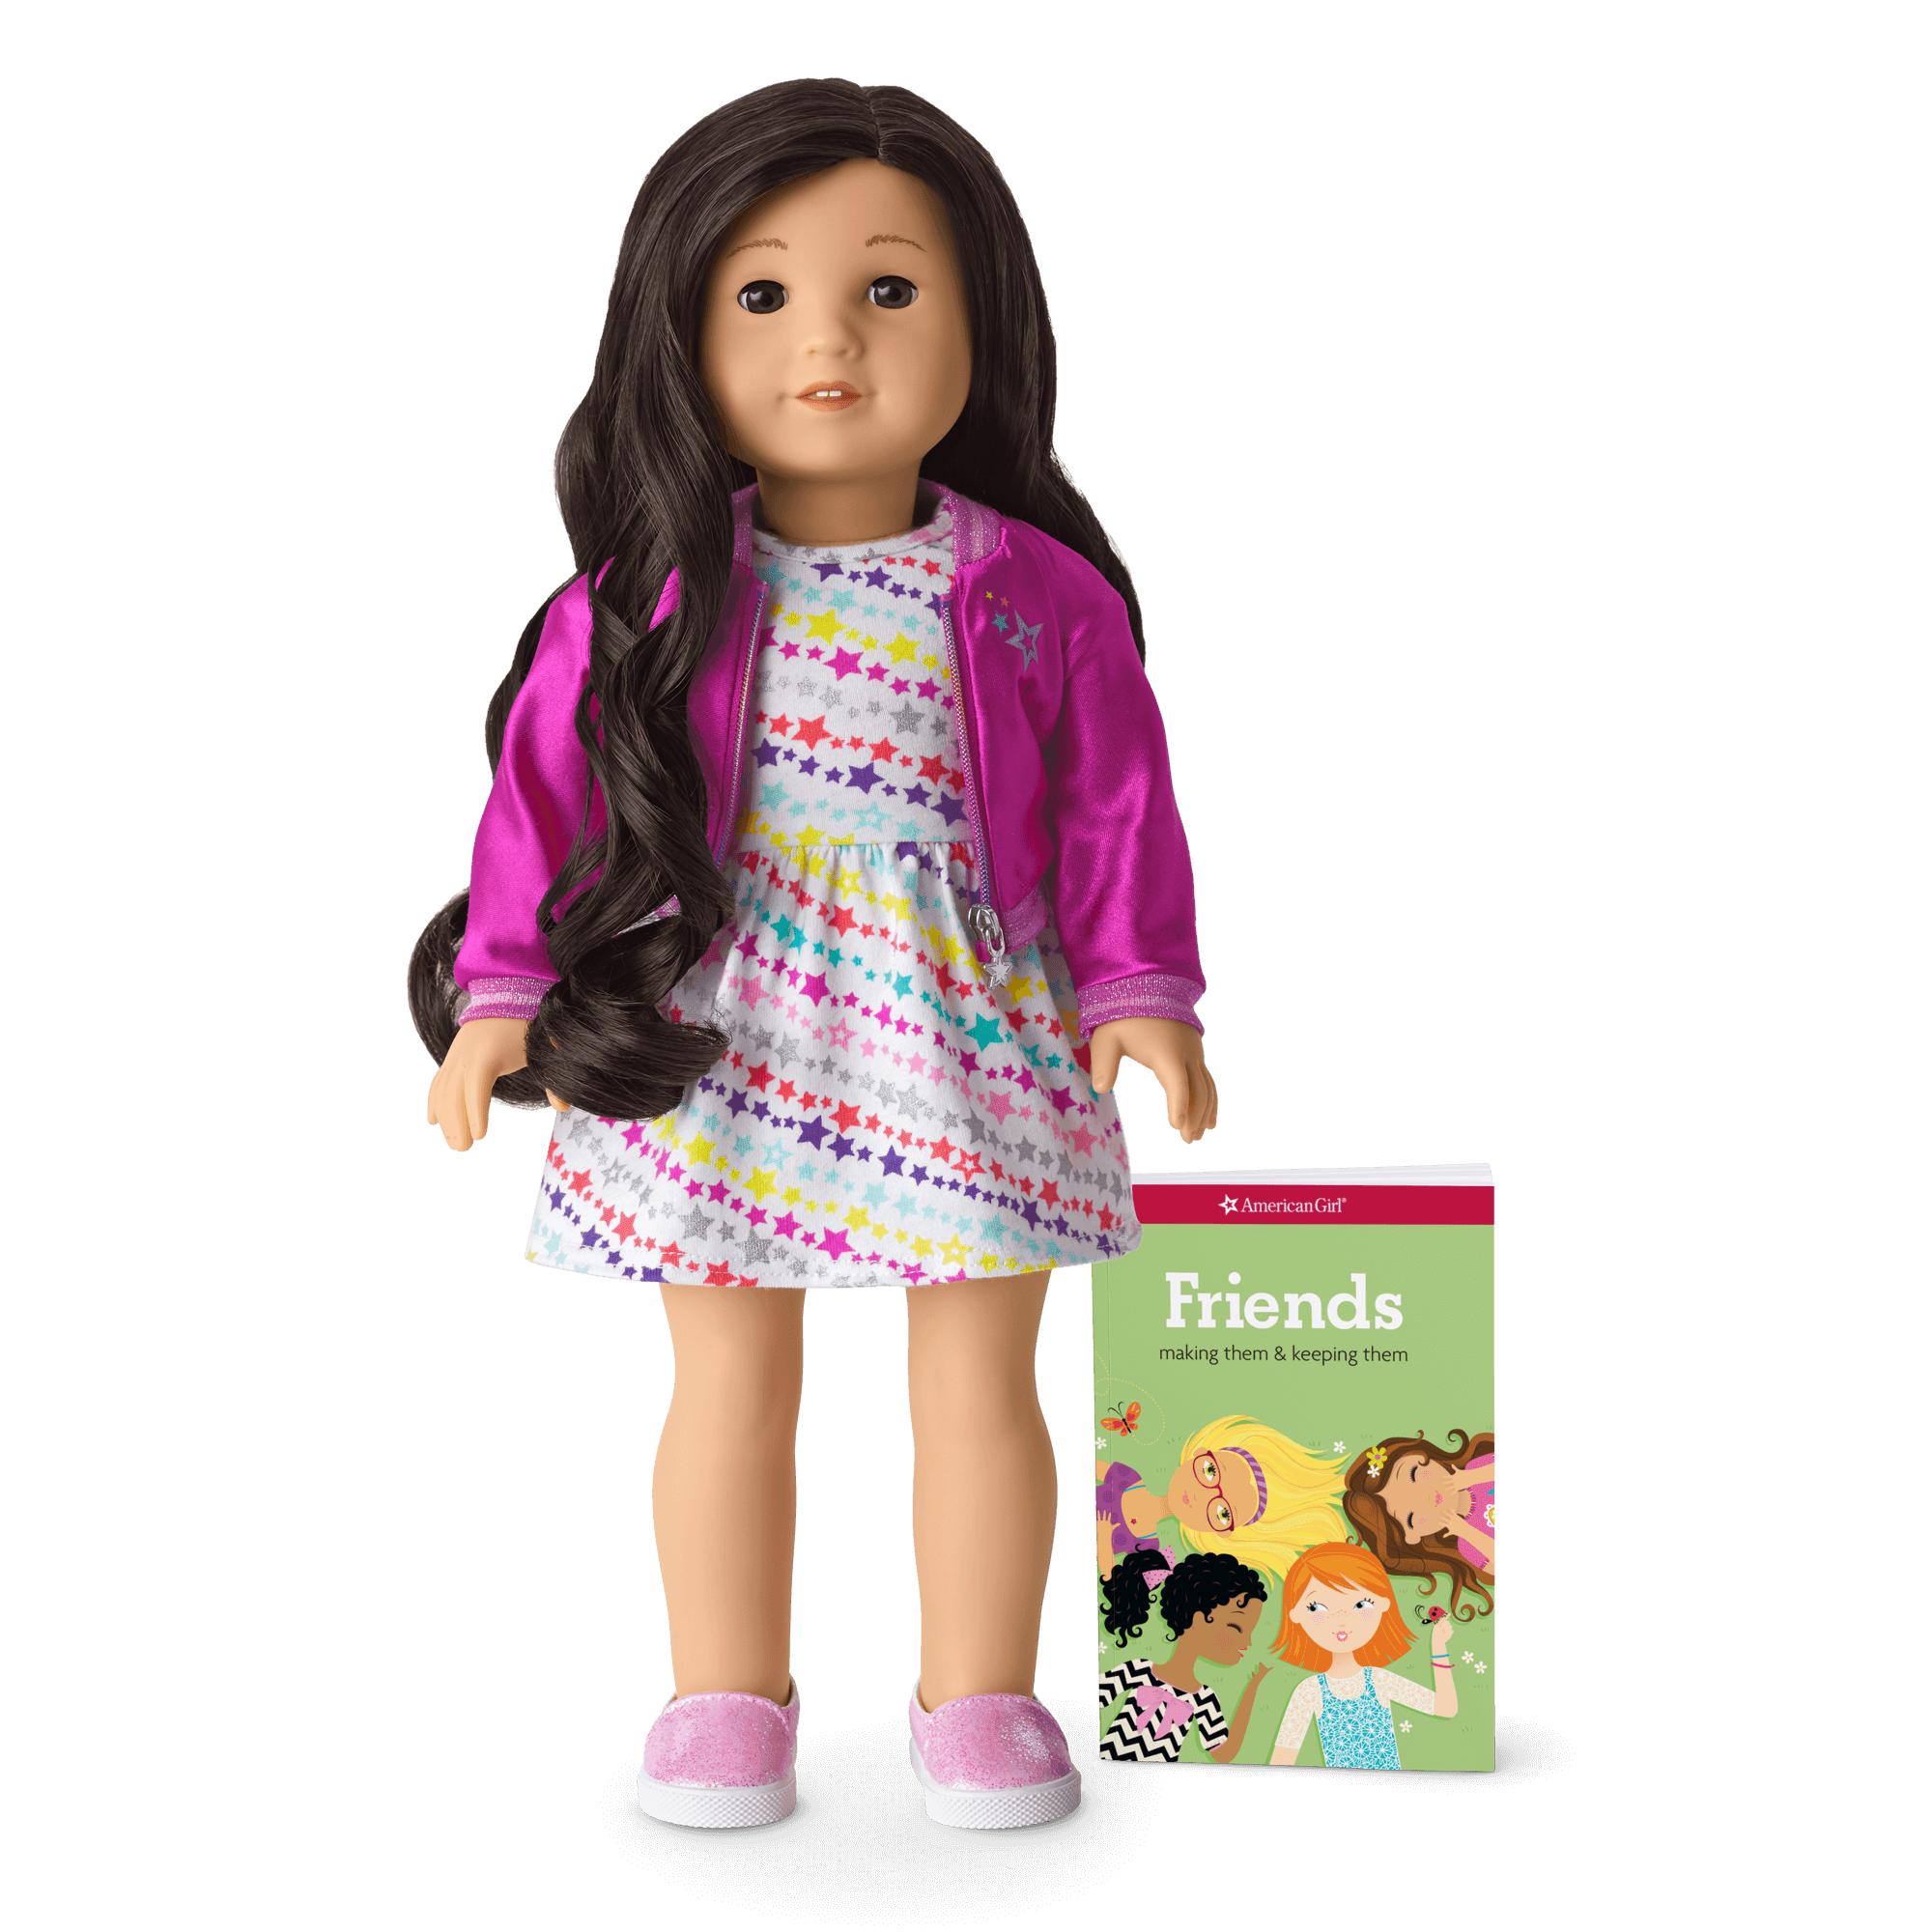 Lila's™ Accessories for 18-inch Dolls